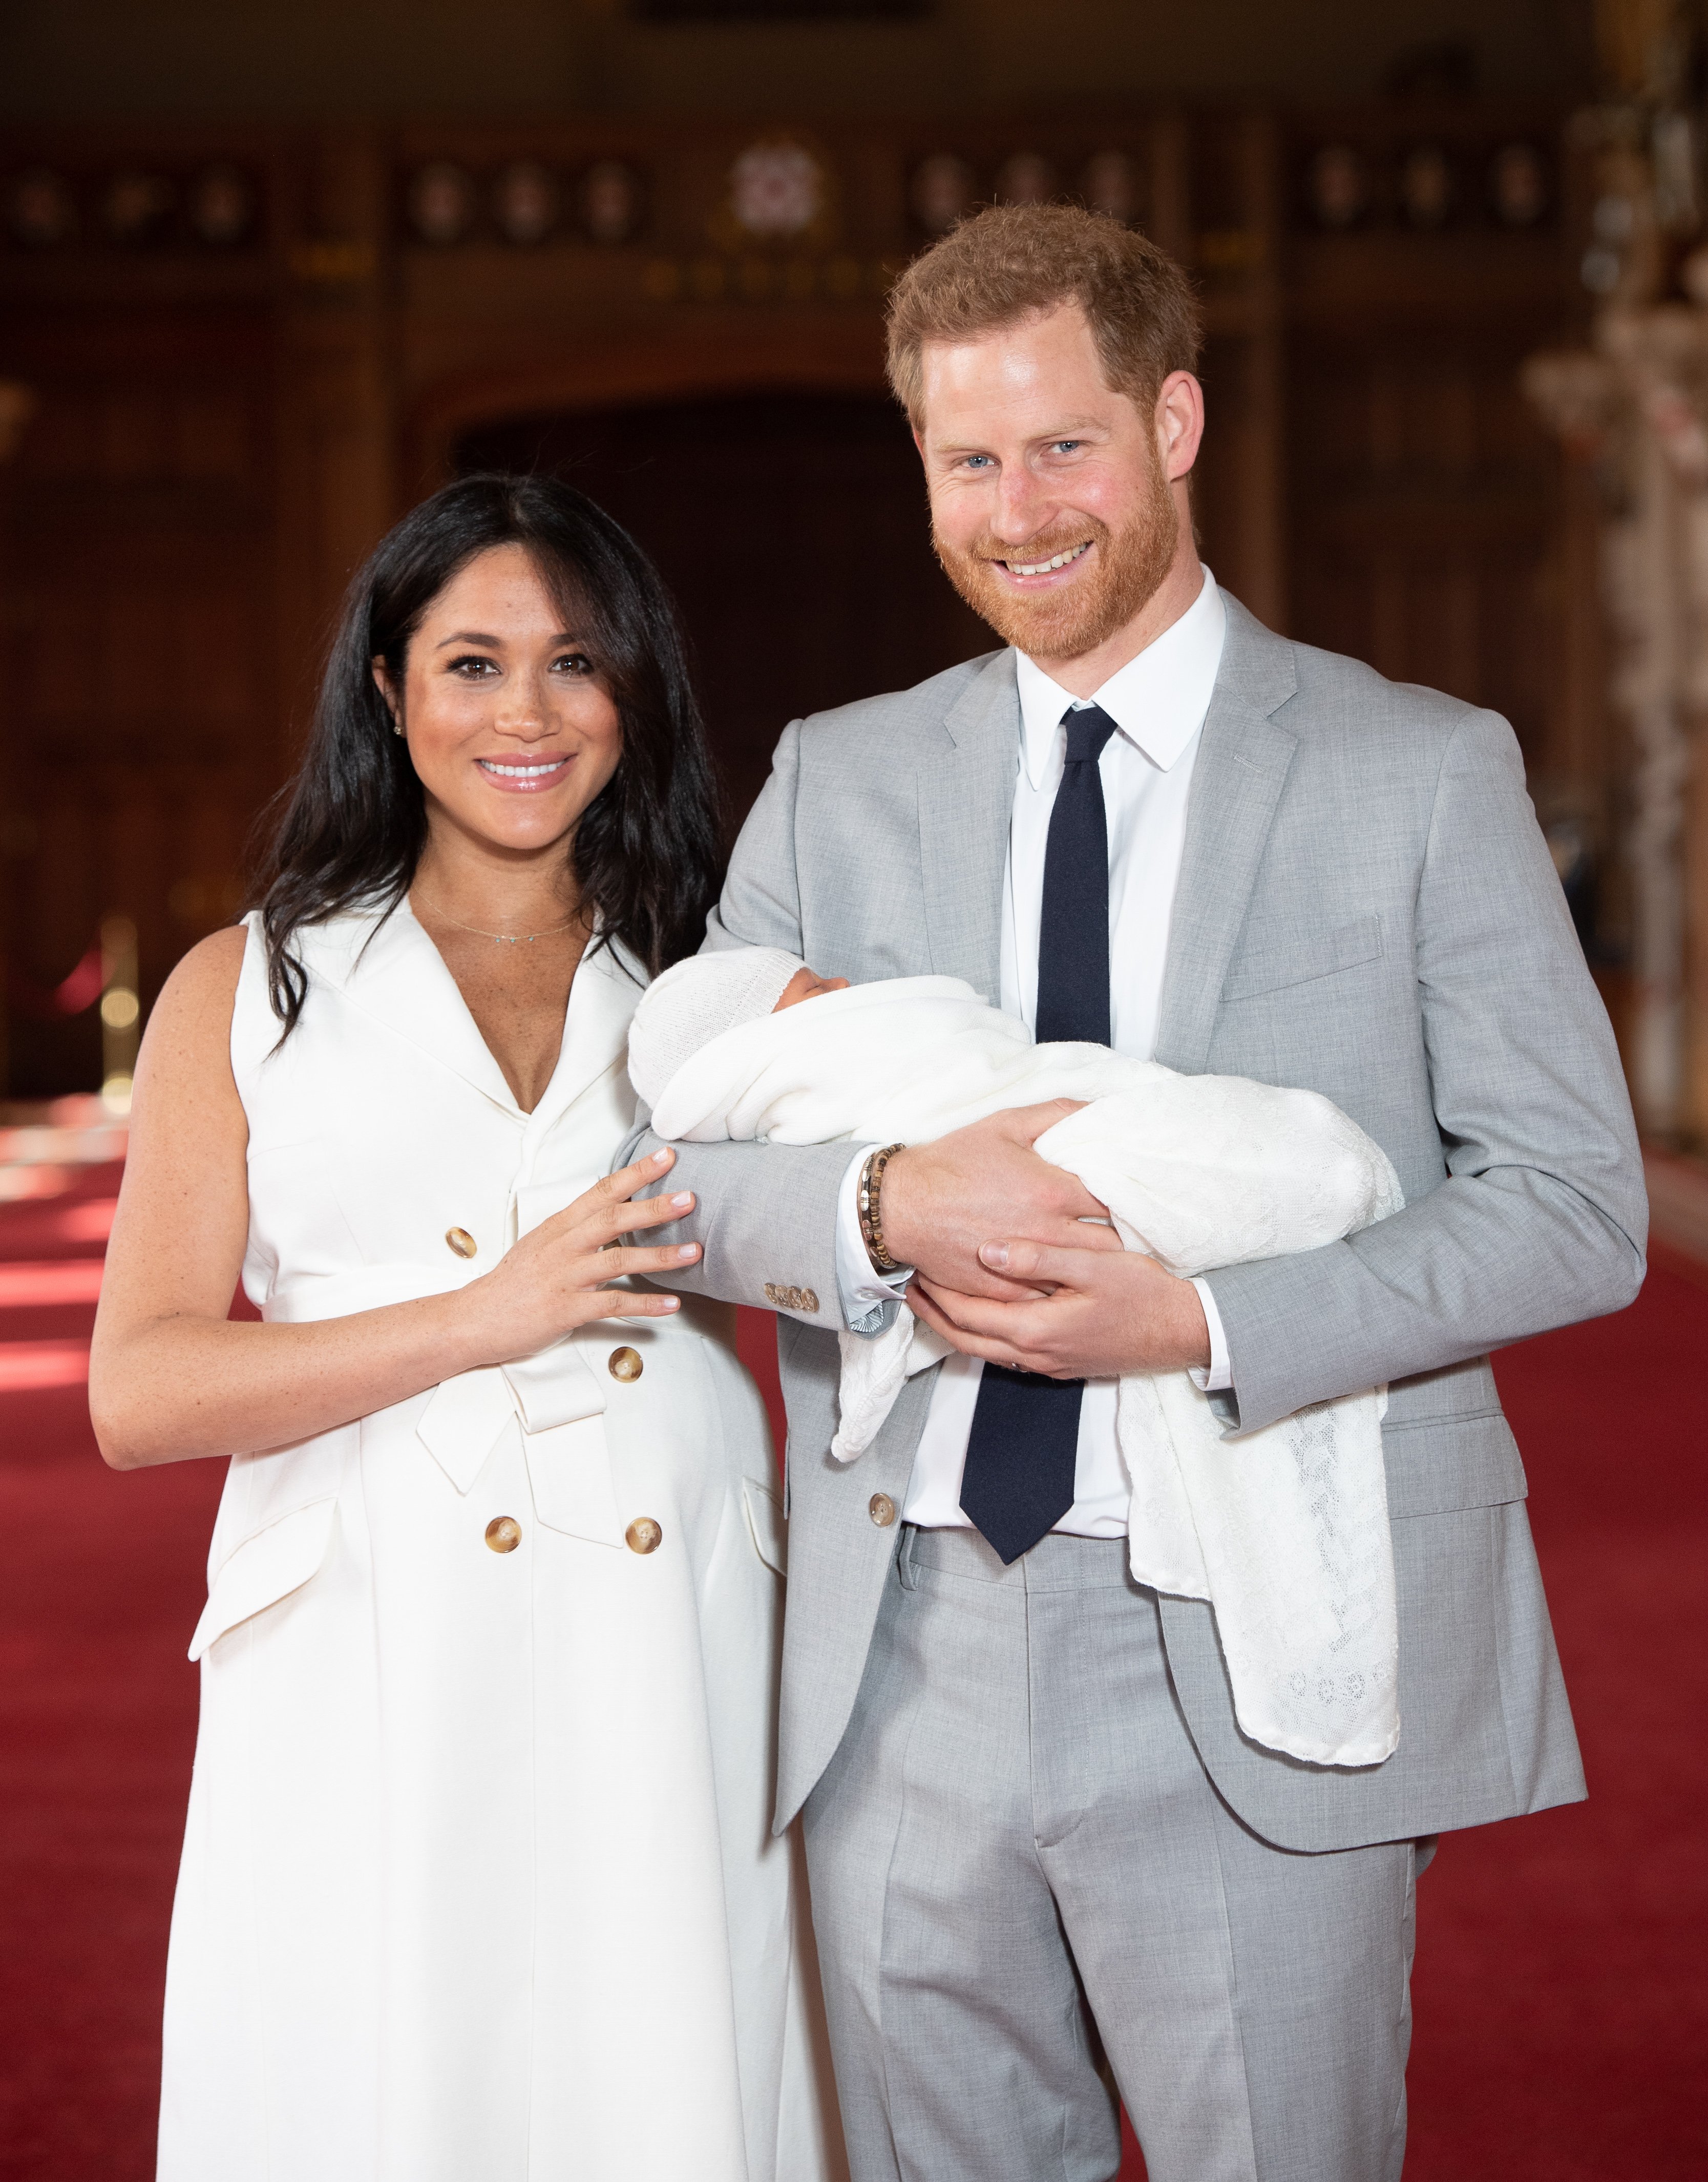 Prince Harry and Meghan Markle introduce Archie Harrison to the world | Photo: Getty Images